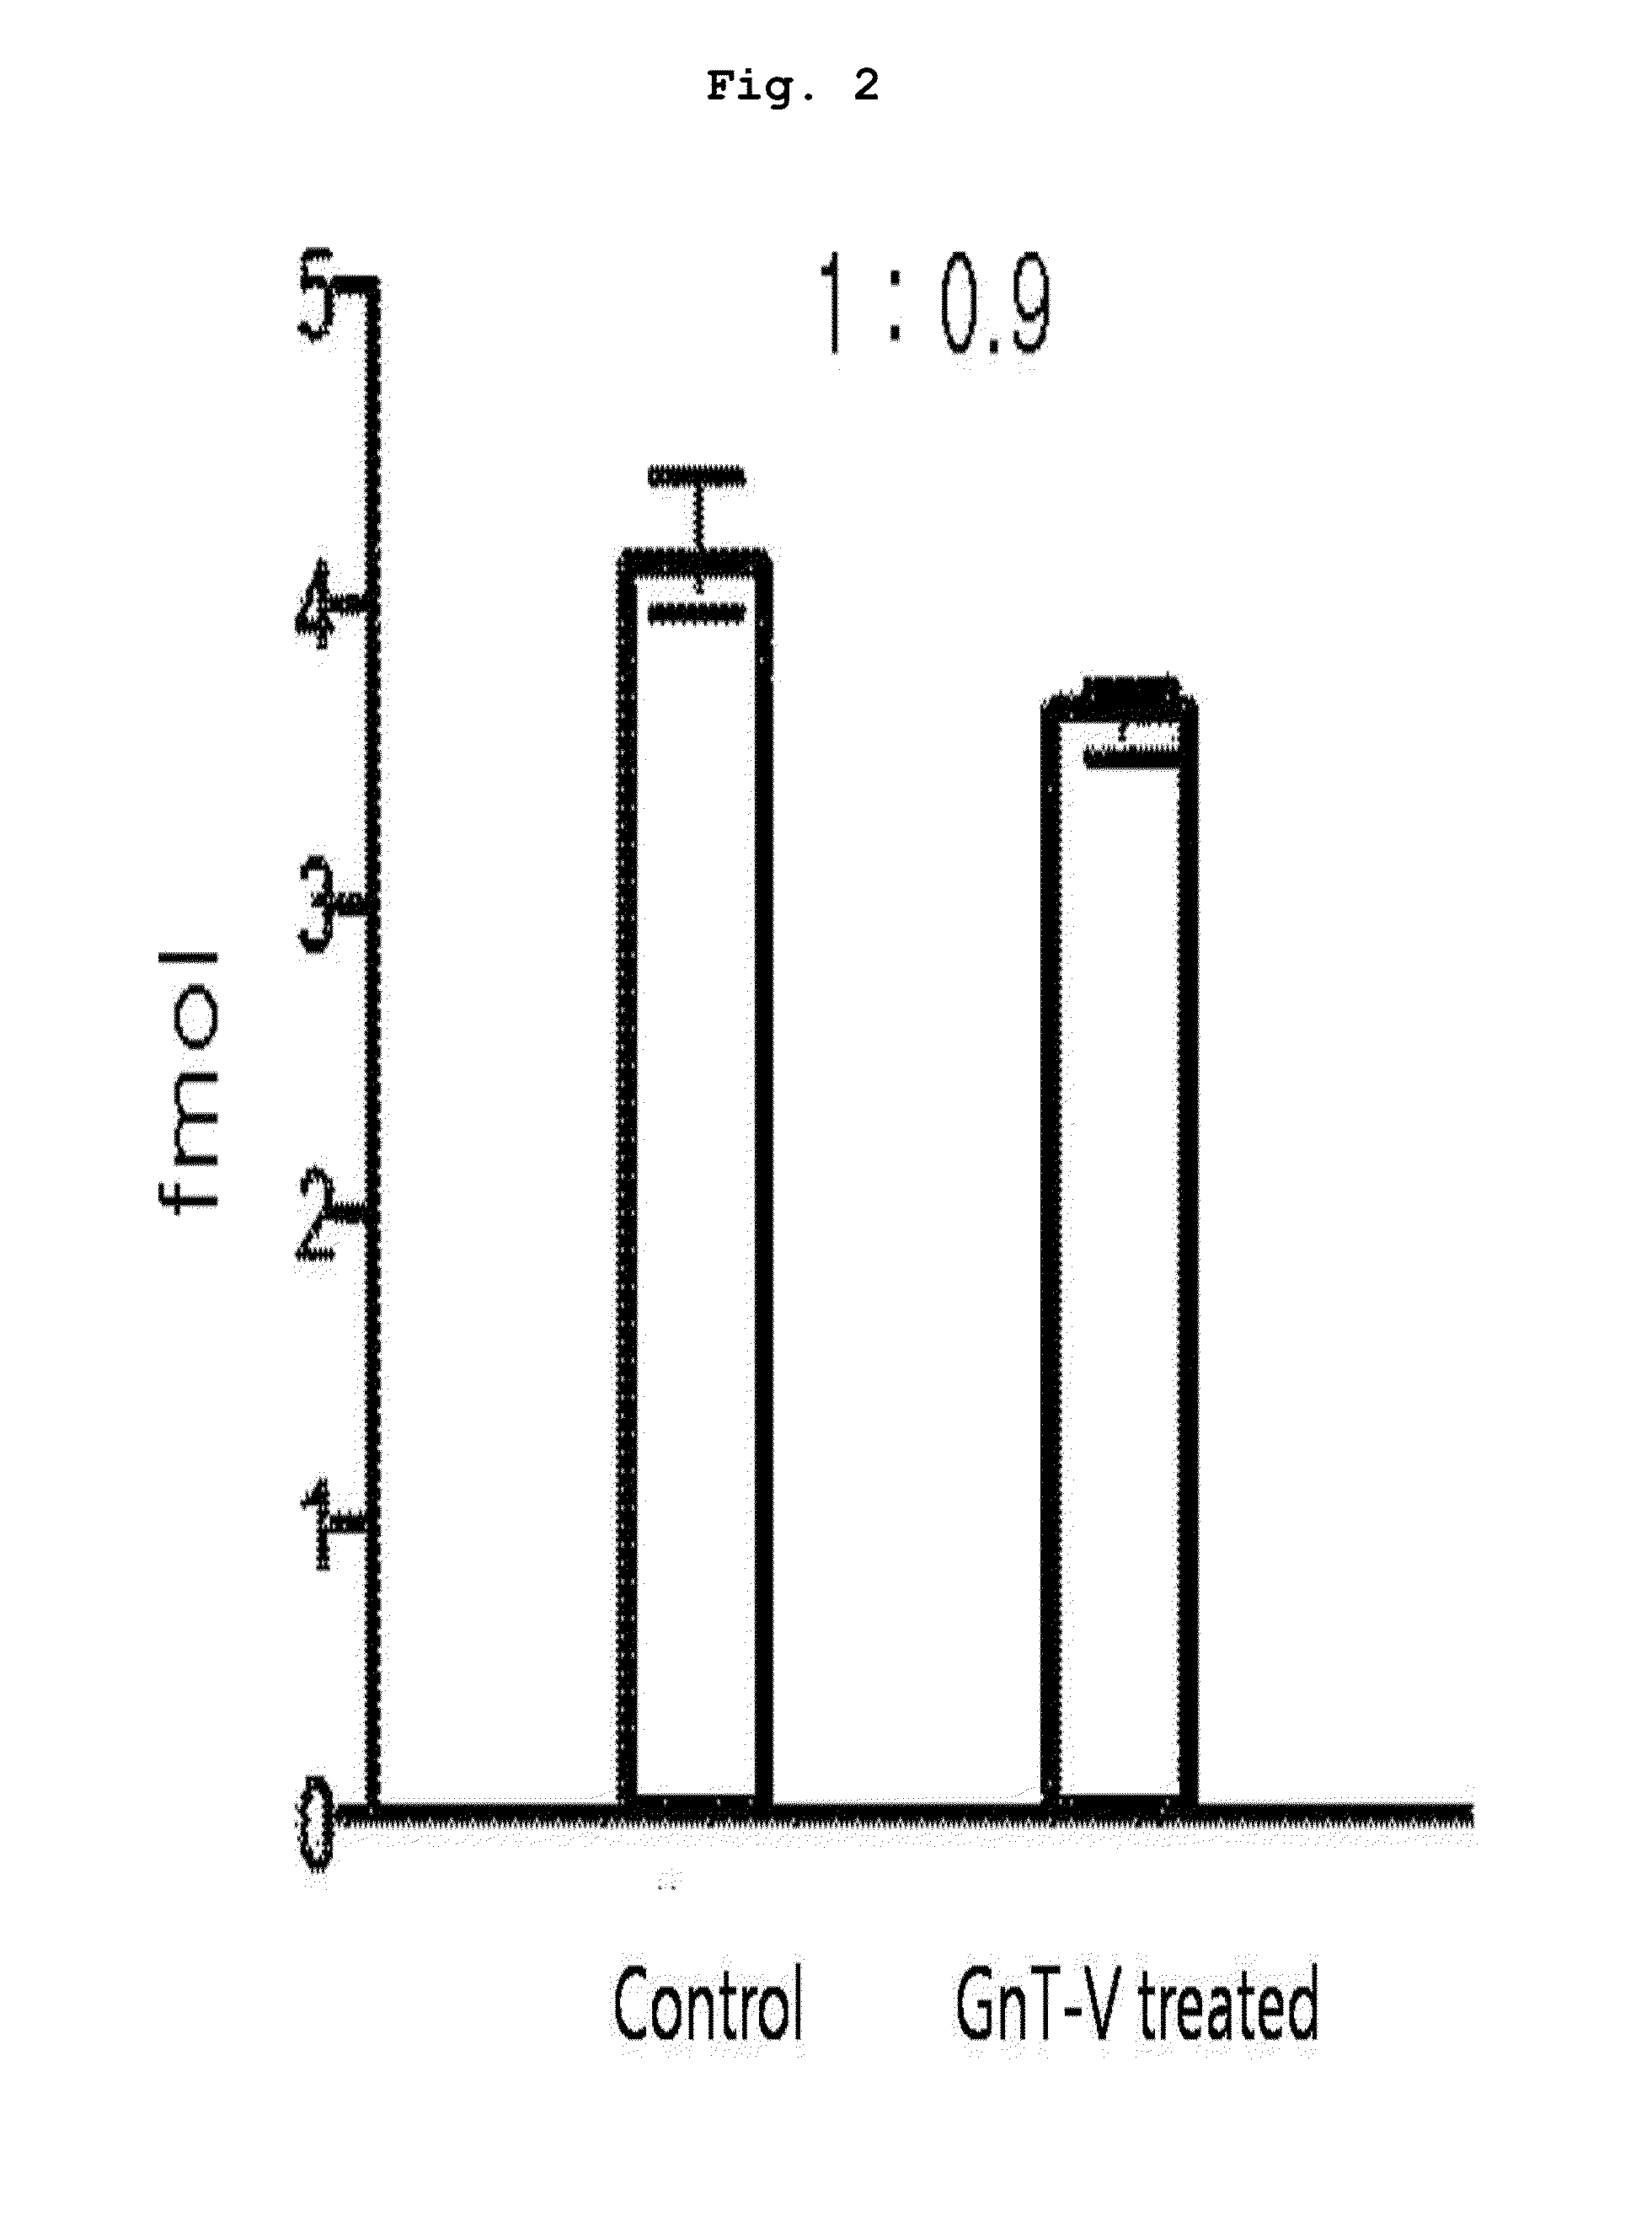 Cancer diagnosis marker using the aberrant glycosylation of a protein